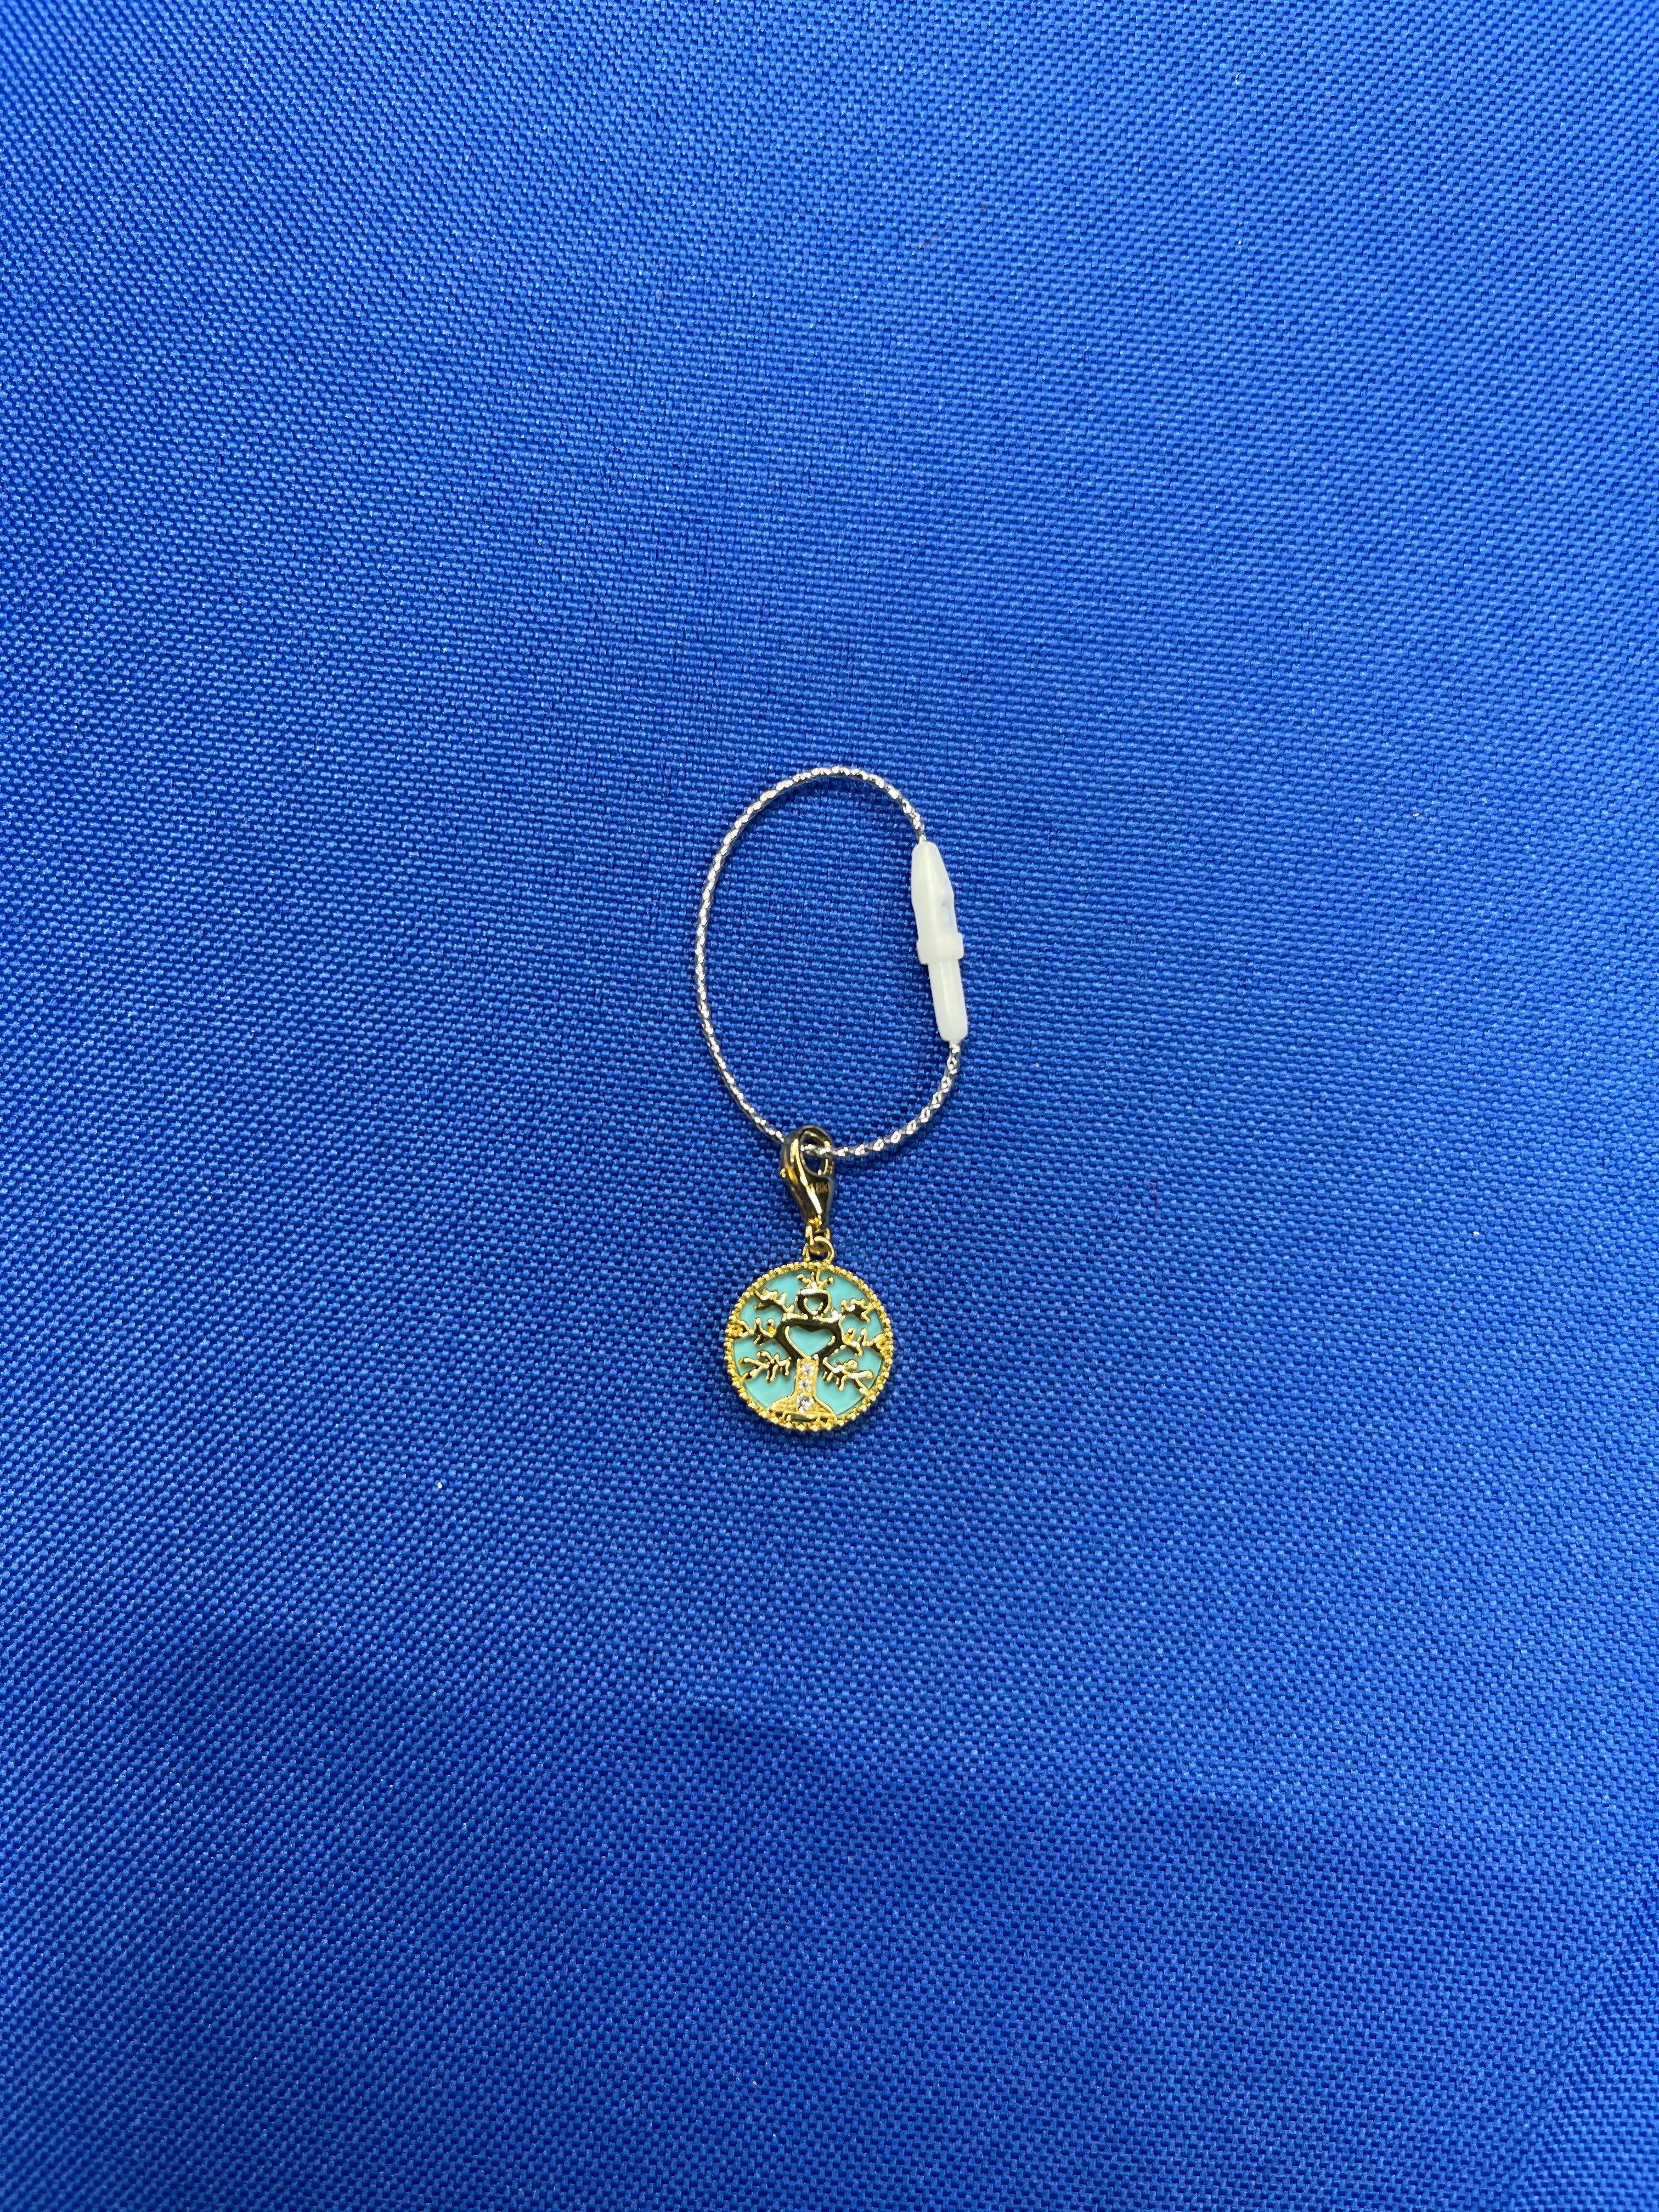 Round Cut Diamond Tree of Life Yellow Gold Medallion Charm Teal Blue Turquoise Pendant For Sale